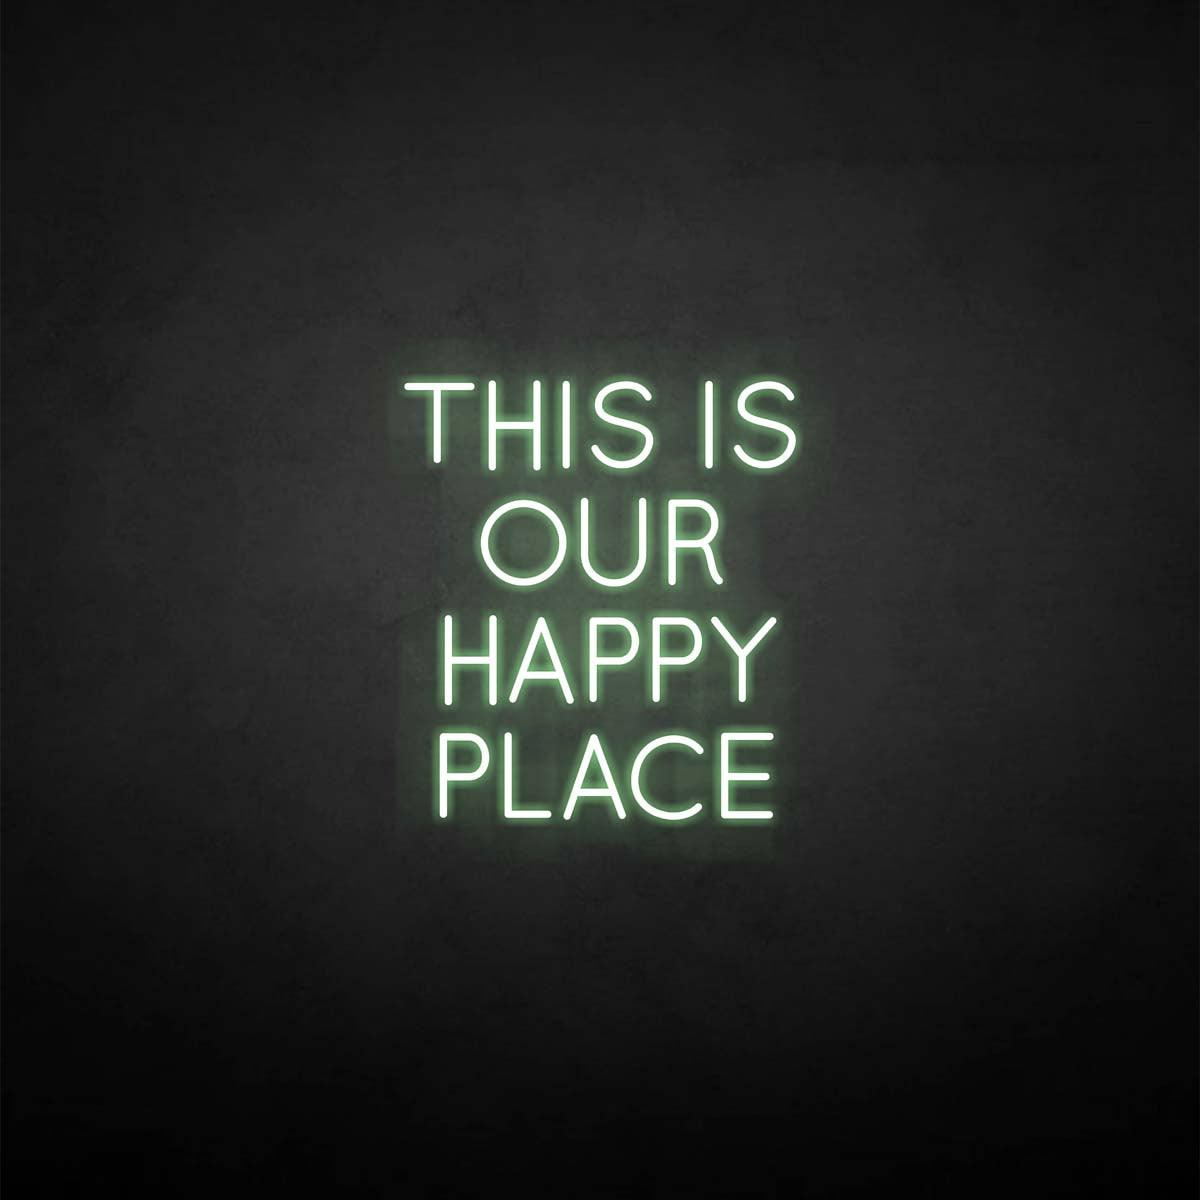 'This is our happy place' neon sign